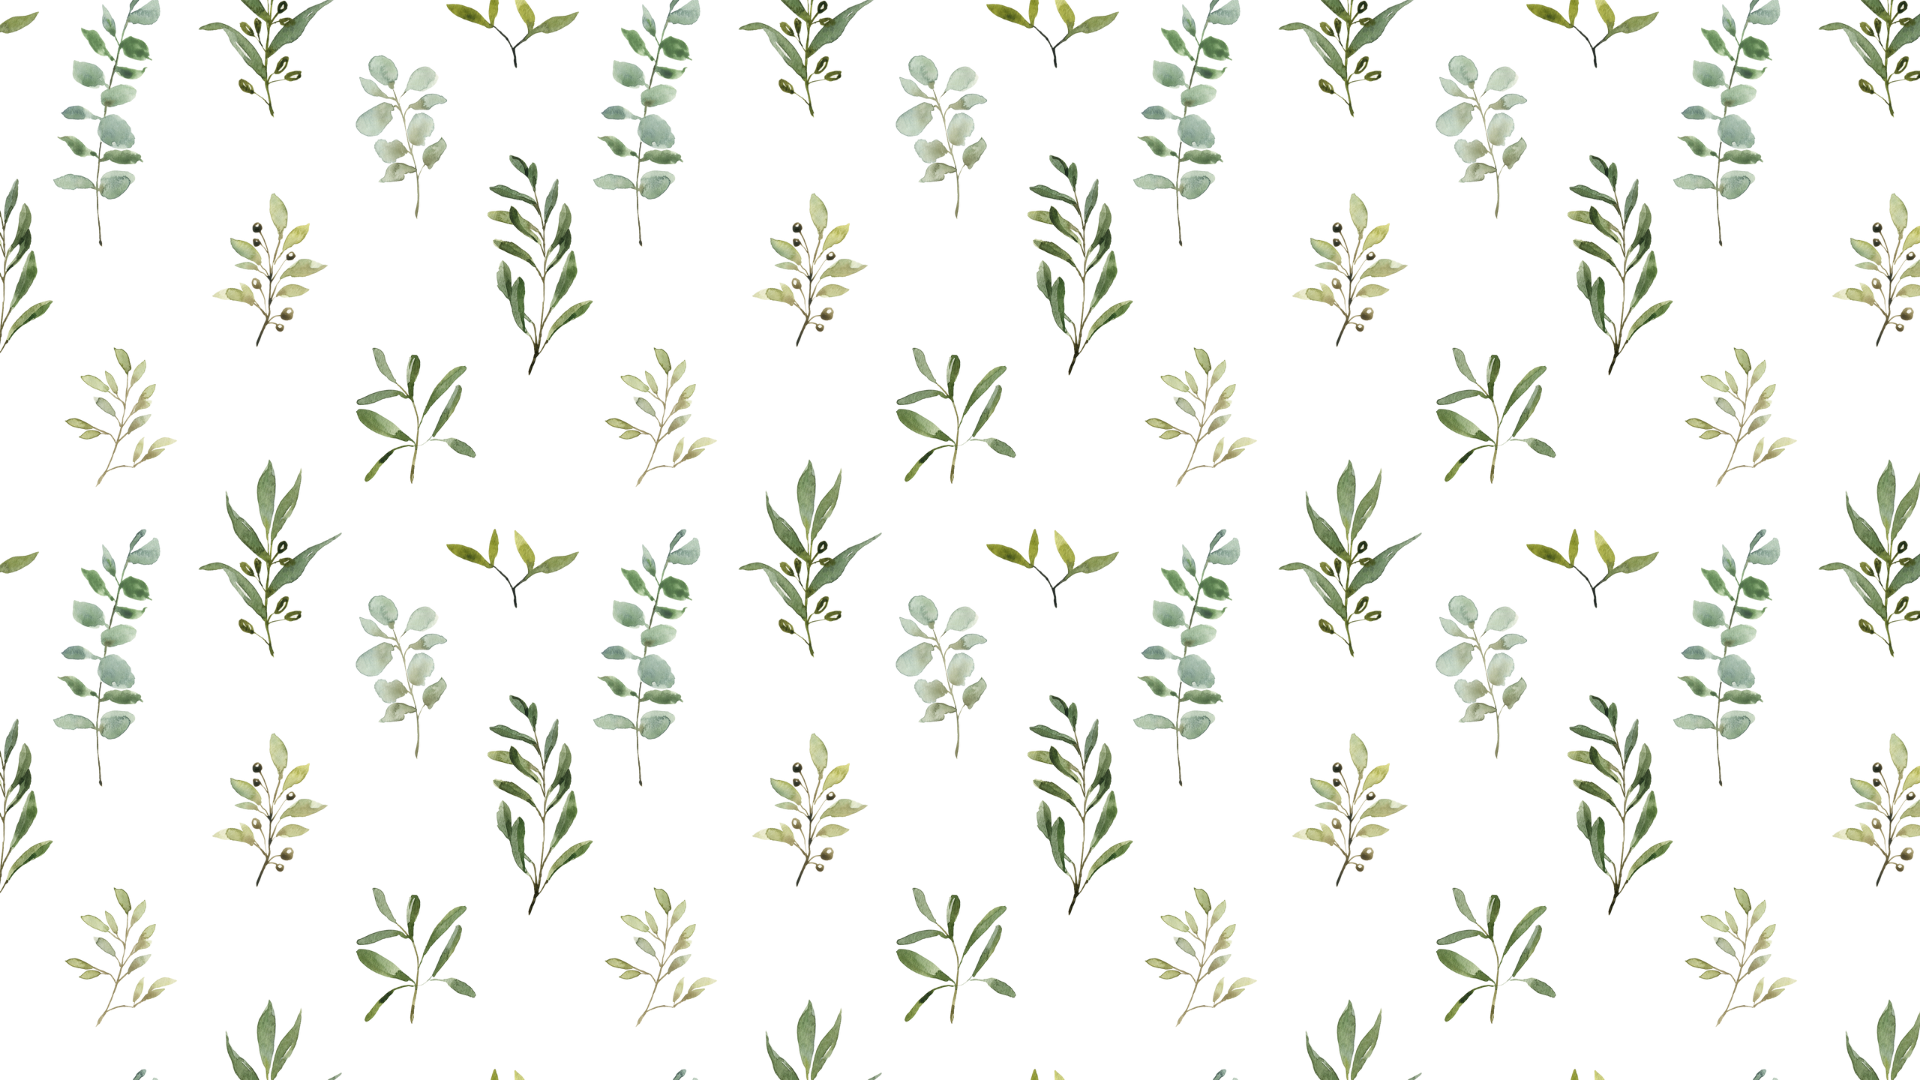 Different type of leaves in green on white background 